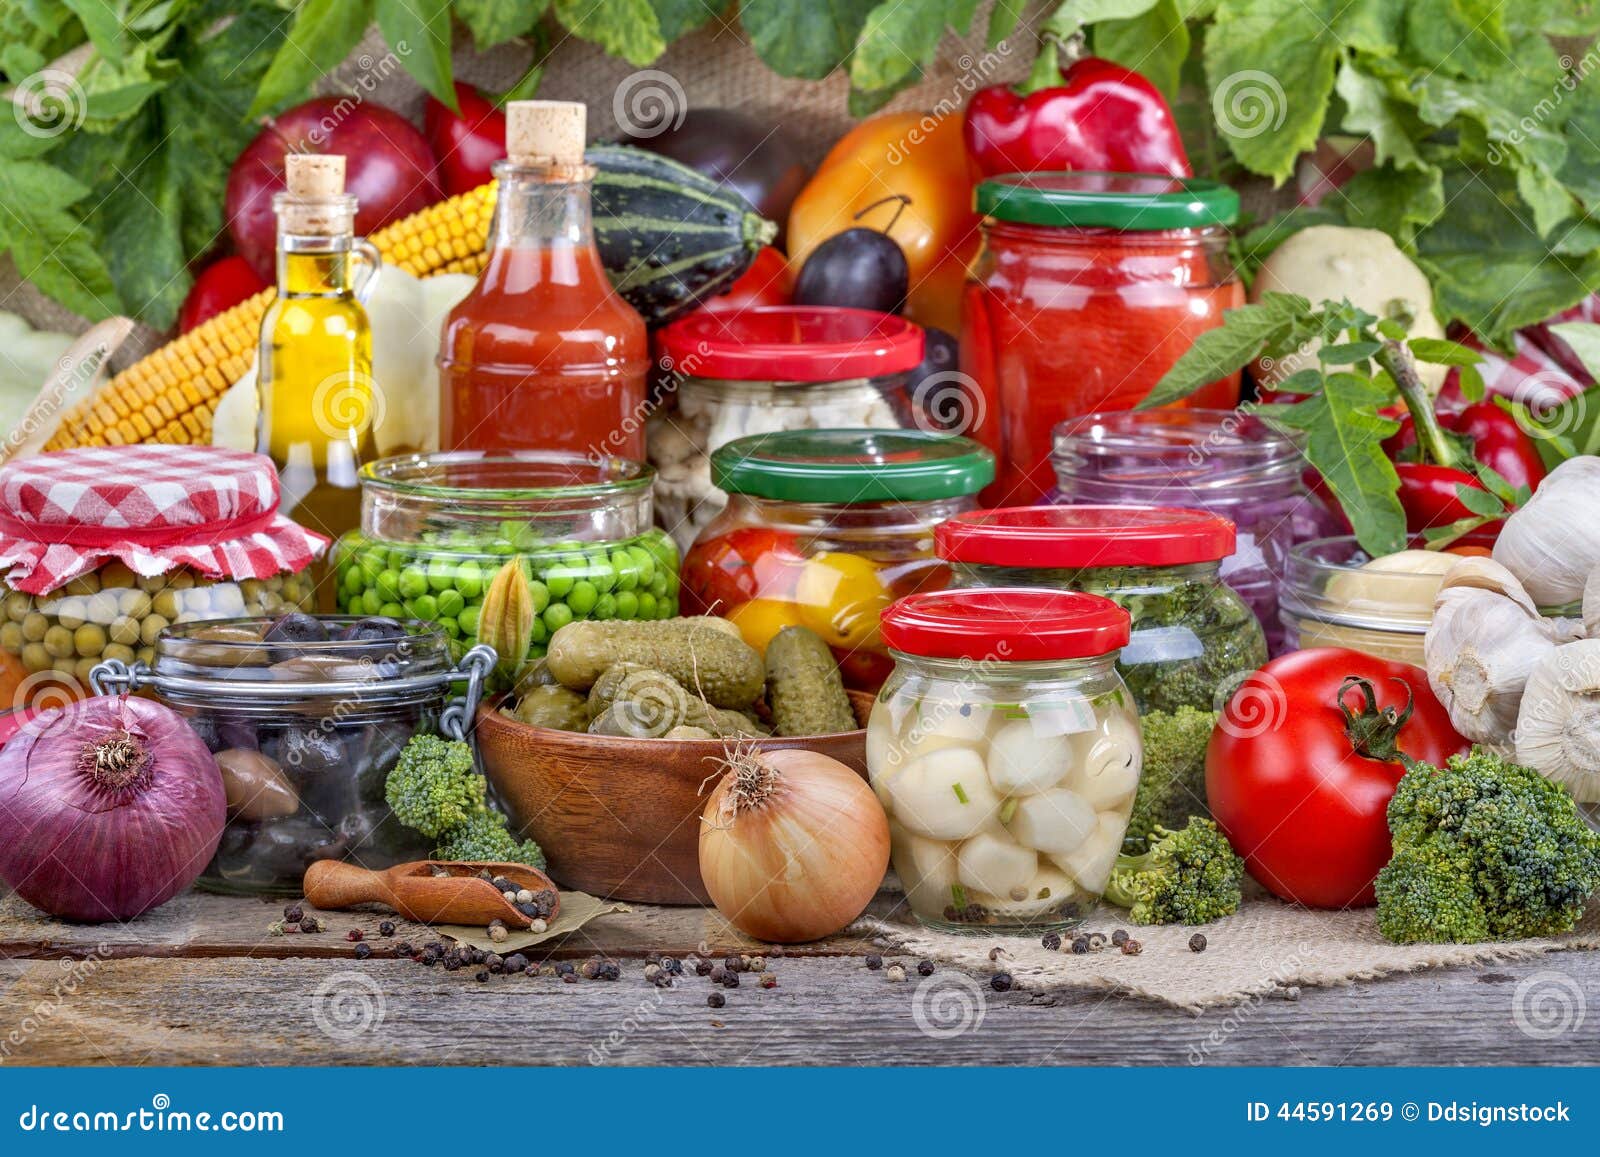 preservation of fruits and vegetables